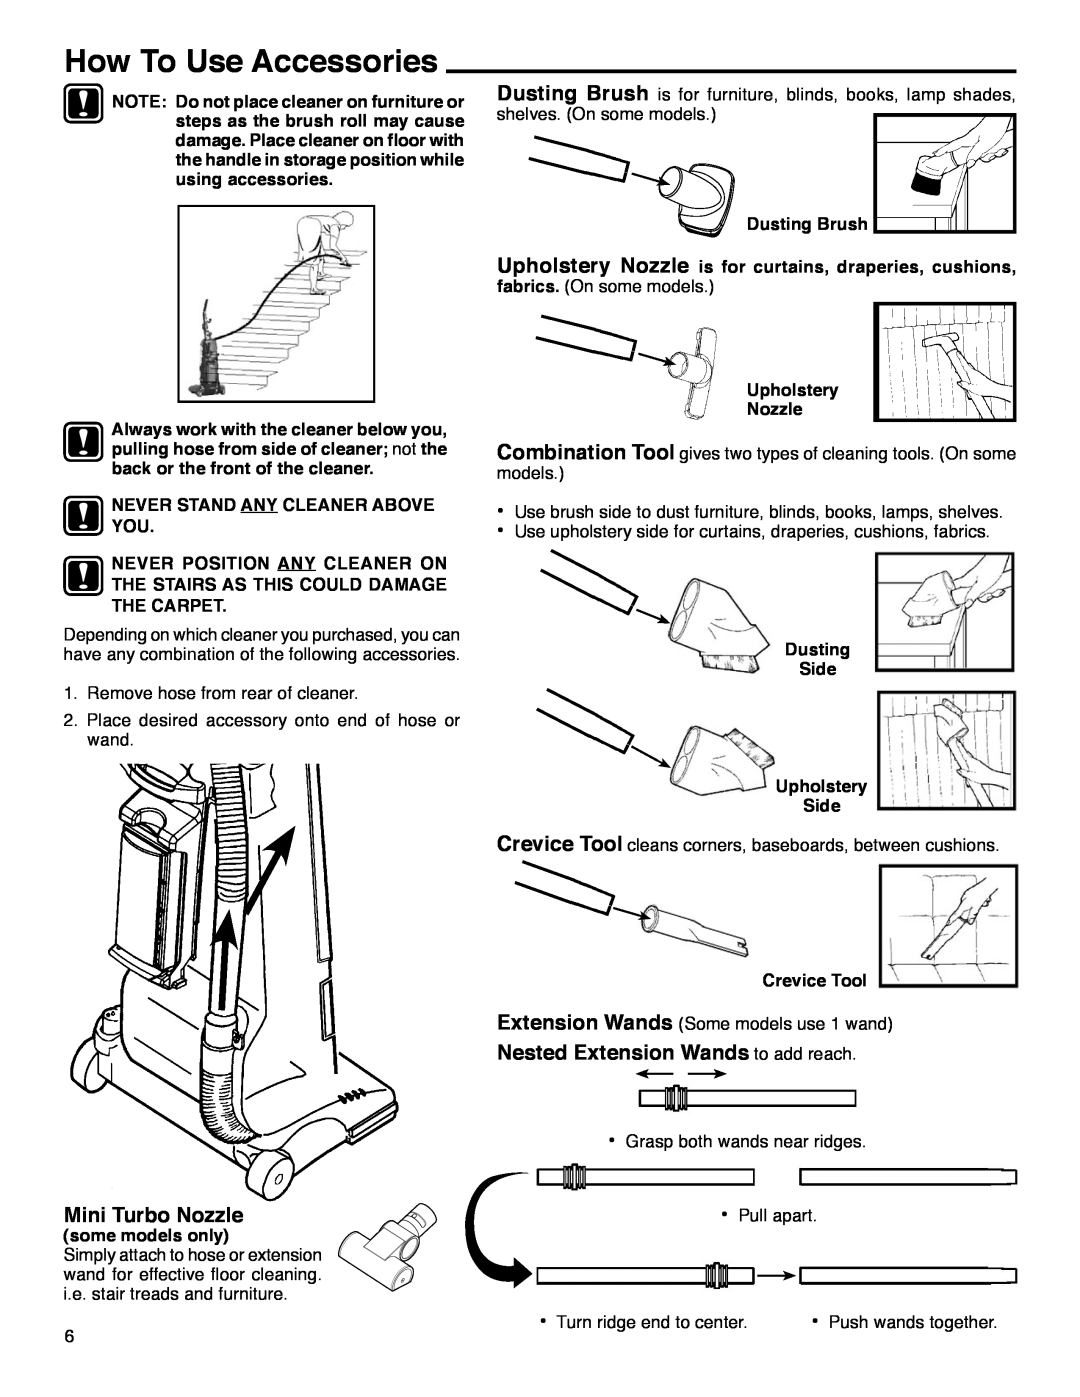 Eureka 4480 Series manual How To Use Accessories, Never Stand Any Cleaner Above You, Dusting Brush, Upholstery Nozzle 